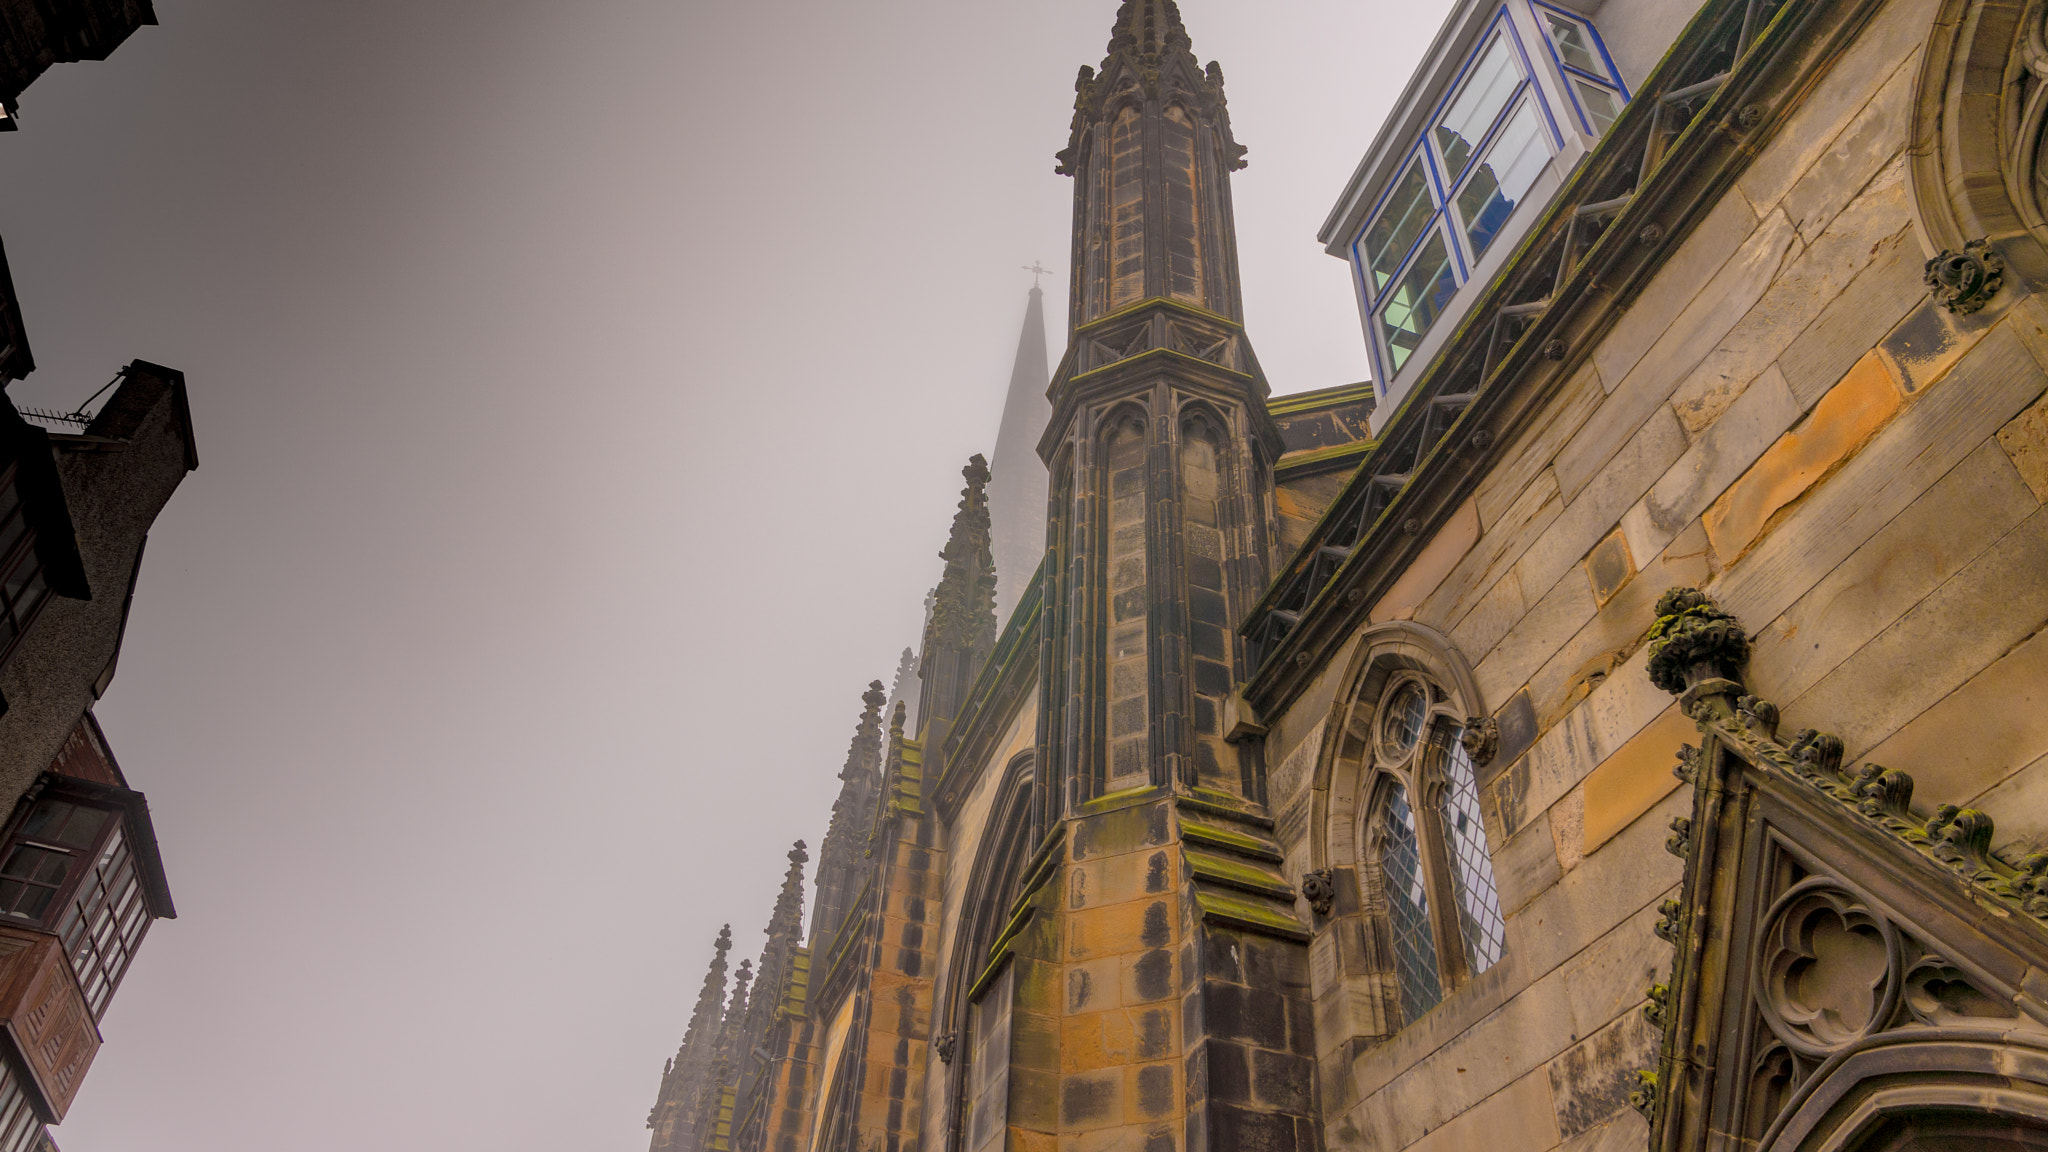 Sony a7 sample photo. Scottish cathedral photography